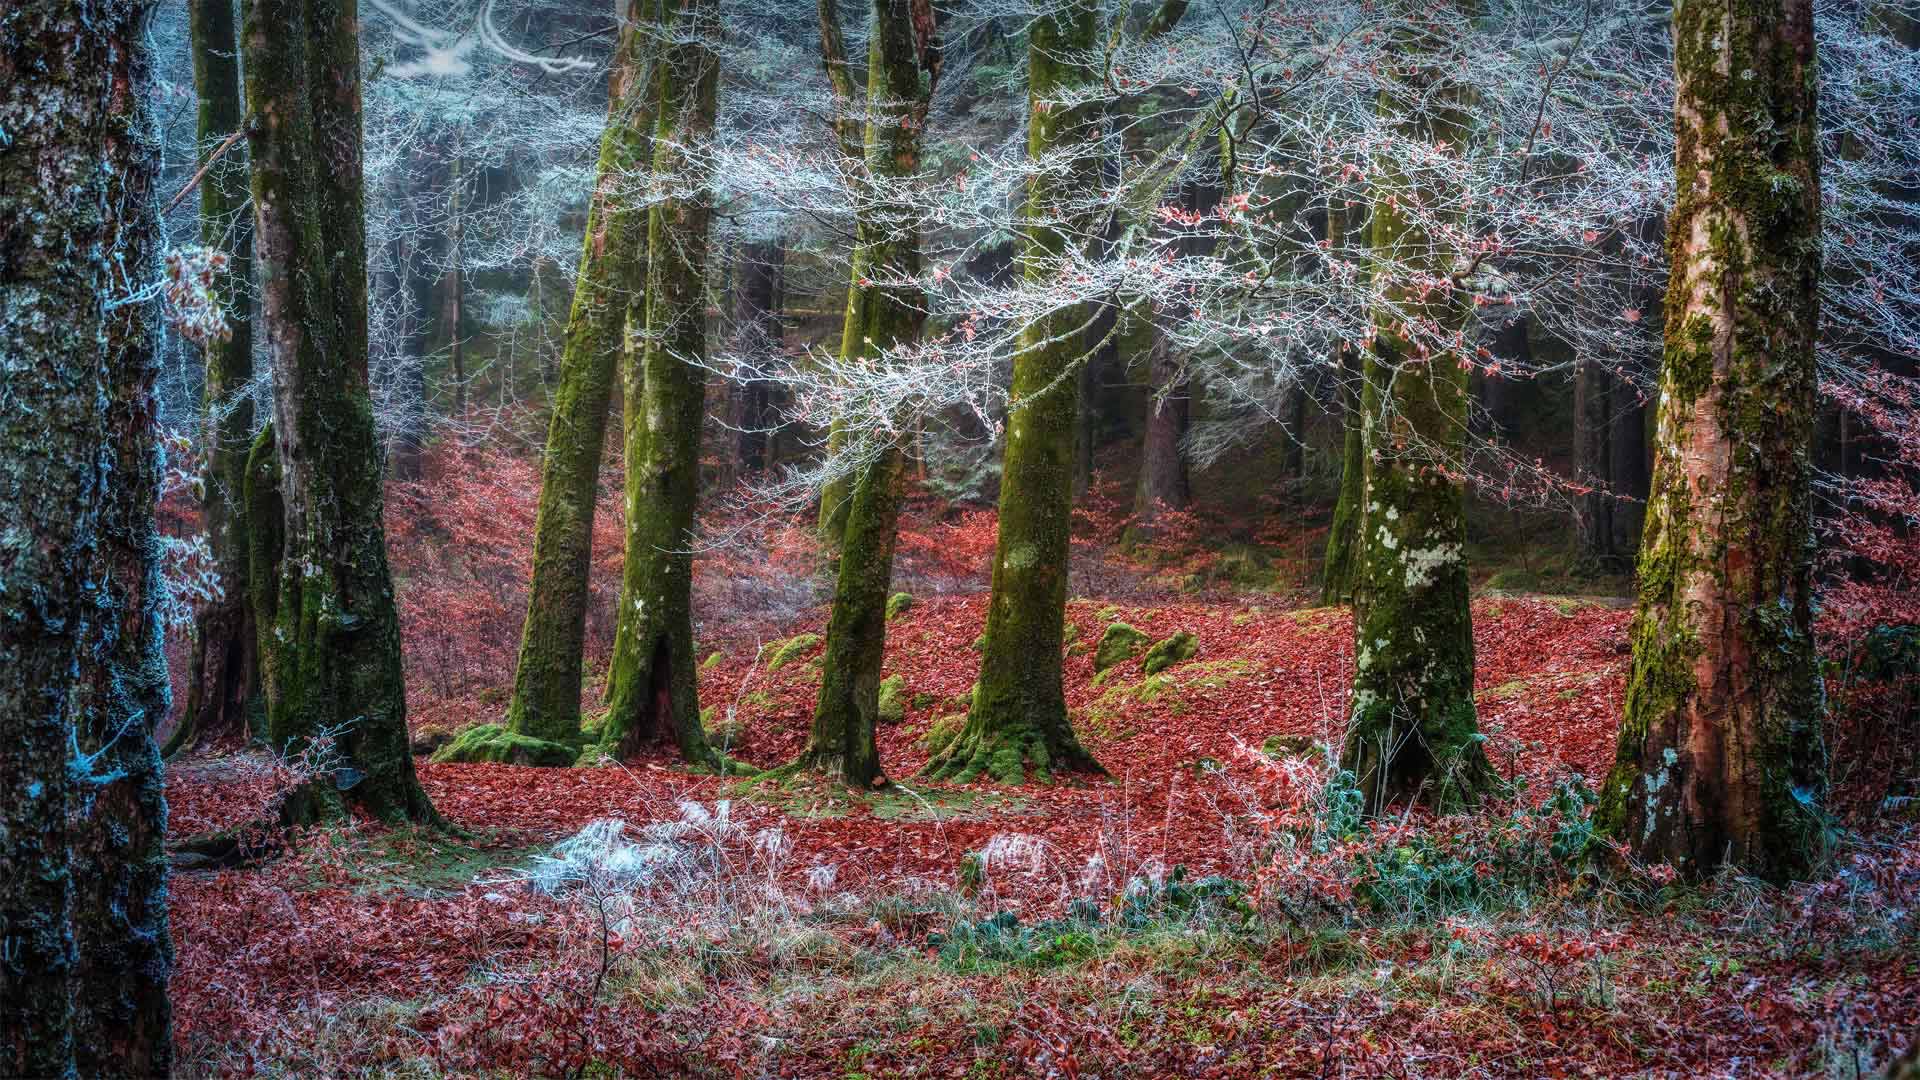 Forest near the village of Invergarry, Scotland - Matt Anderson Photography/Getty Images)